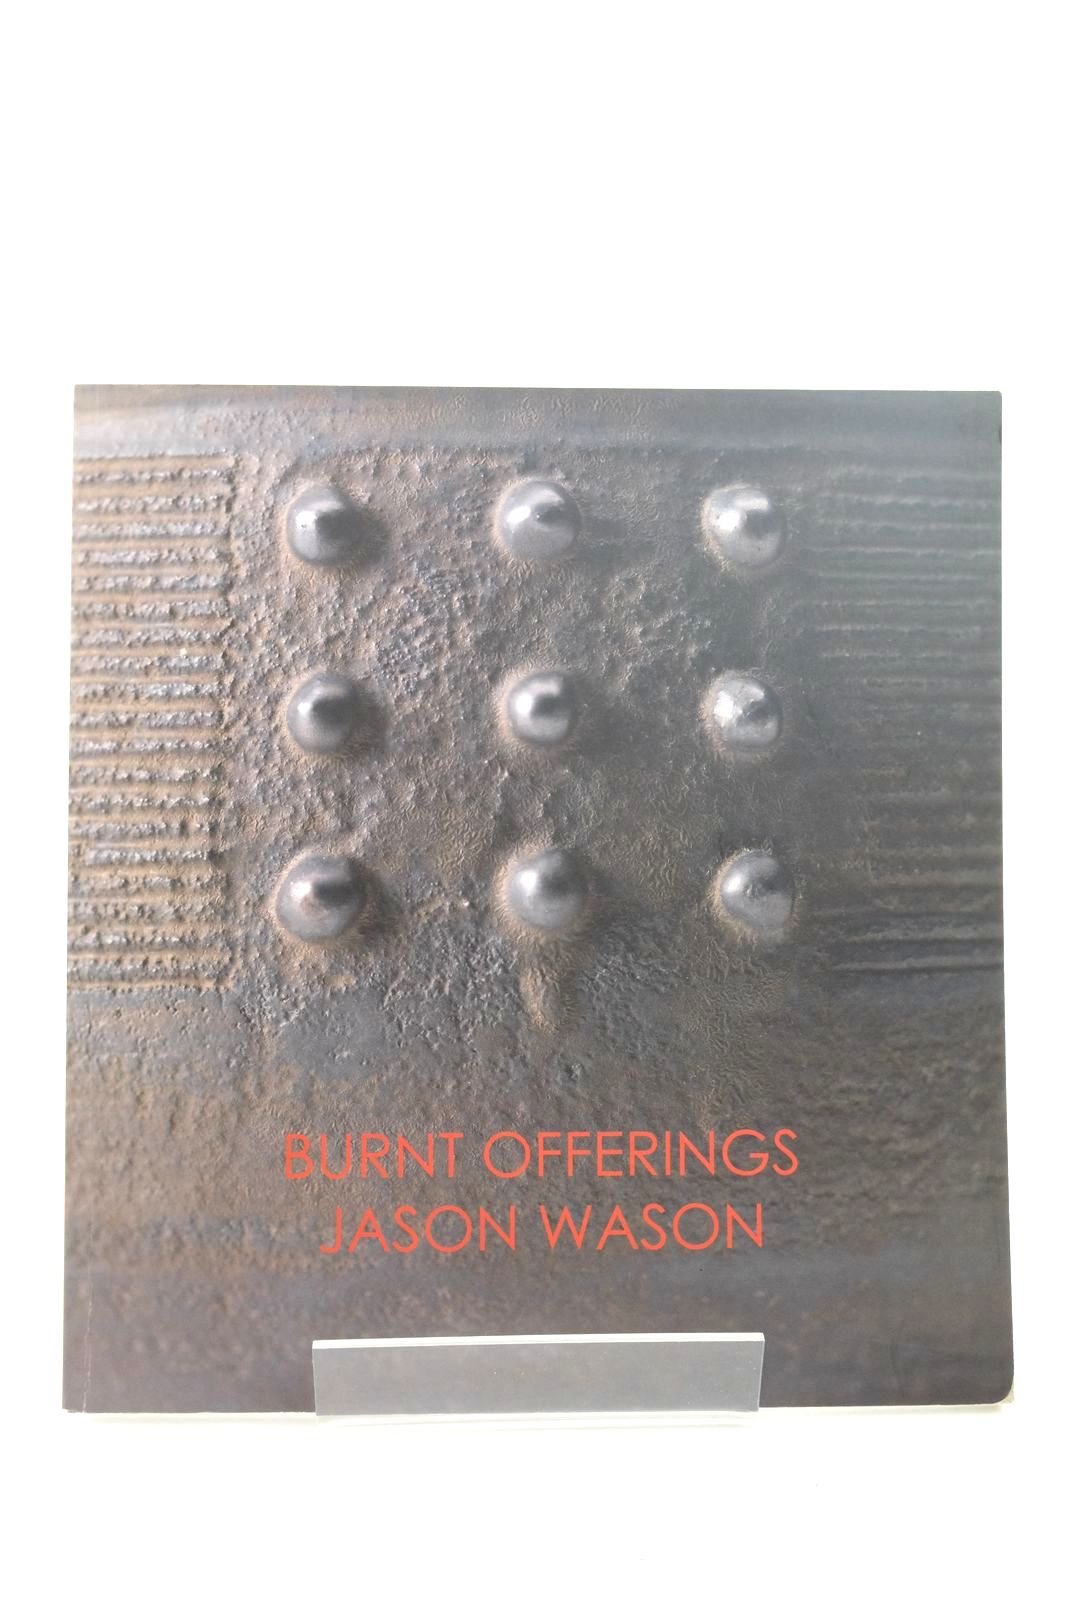 Photo of BURNT OFFERINGS: JASON WASON written by Fagin, Anthony illustrated by Wason, Jason published by Pangolin London (STOCK CODE: 2136612)  for sale by Stella & Rose's Books